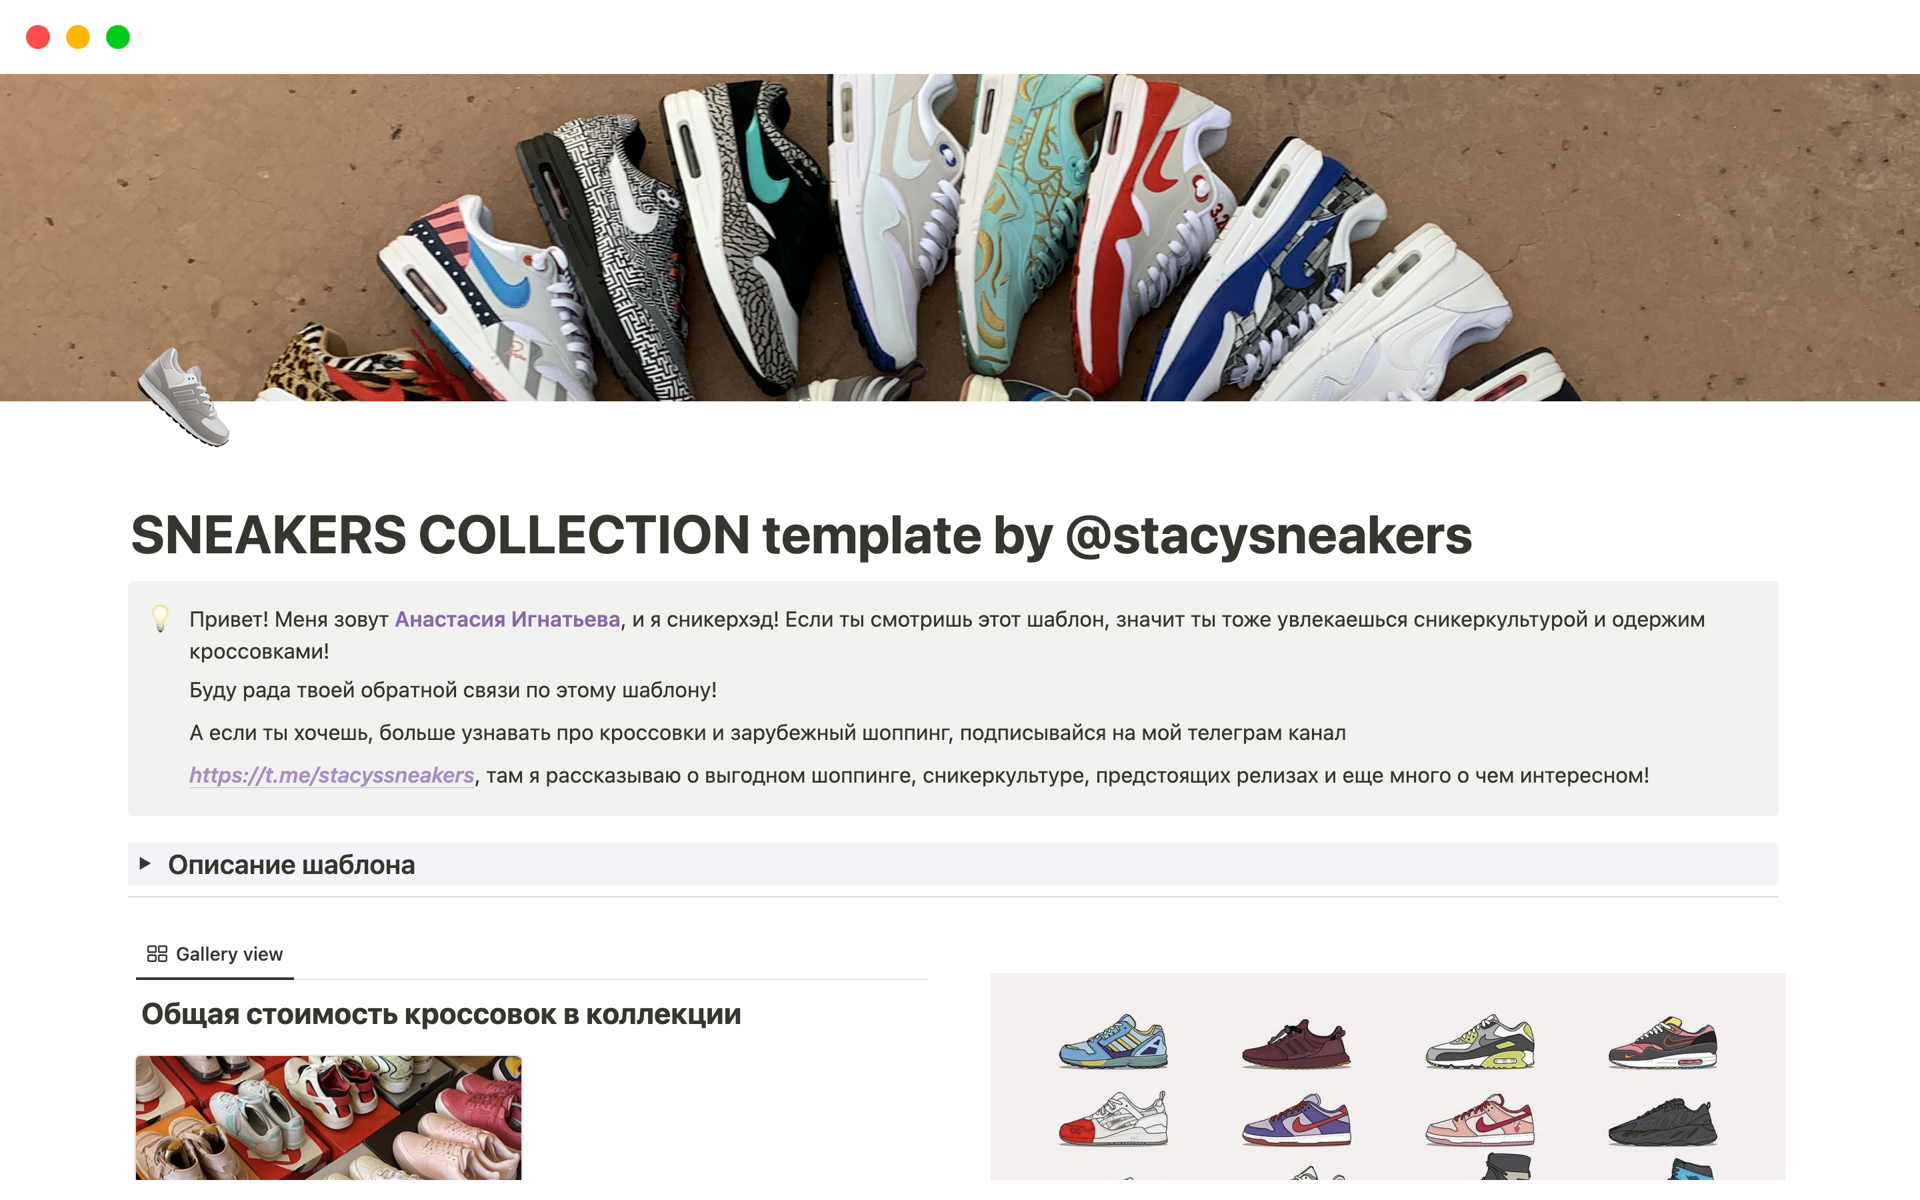 A template preview for SNEAKERS COLLECTION by @stacysneakers